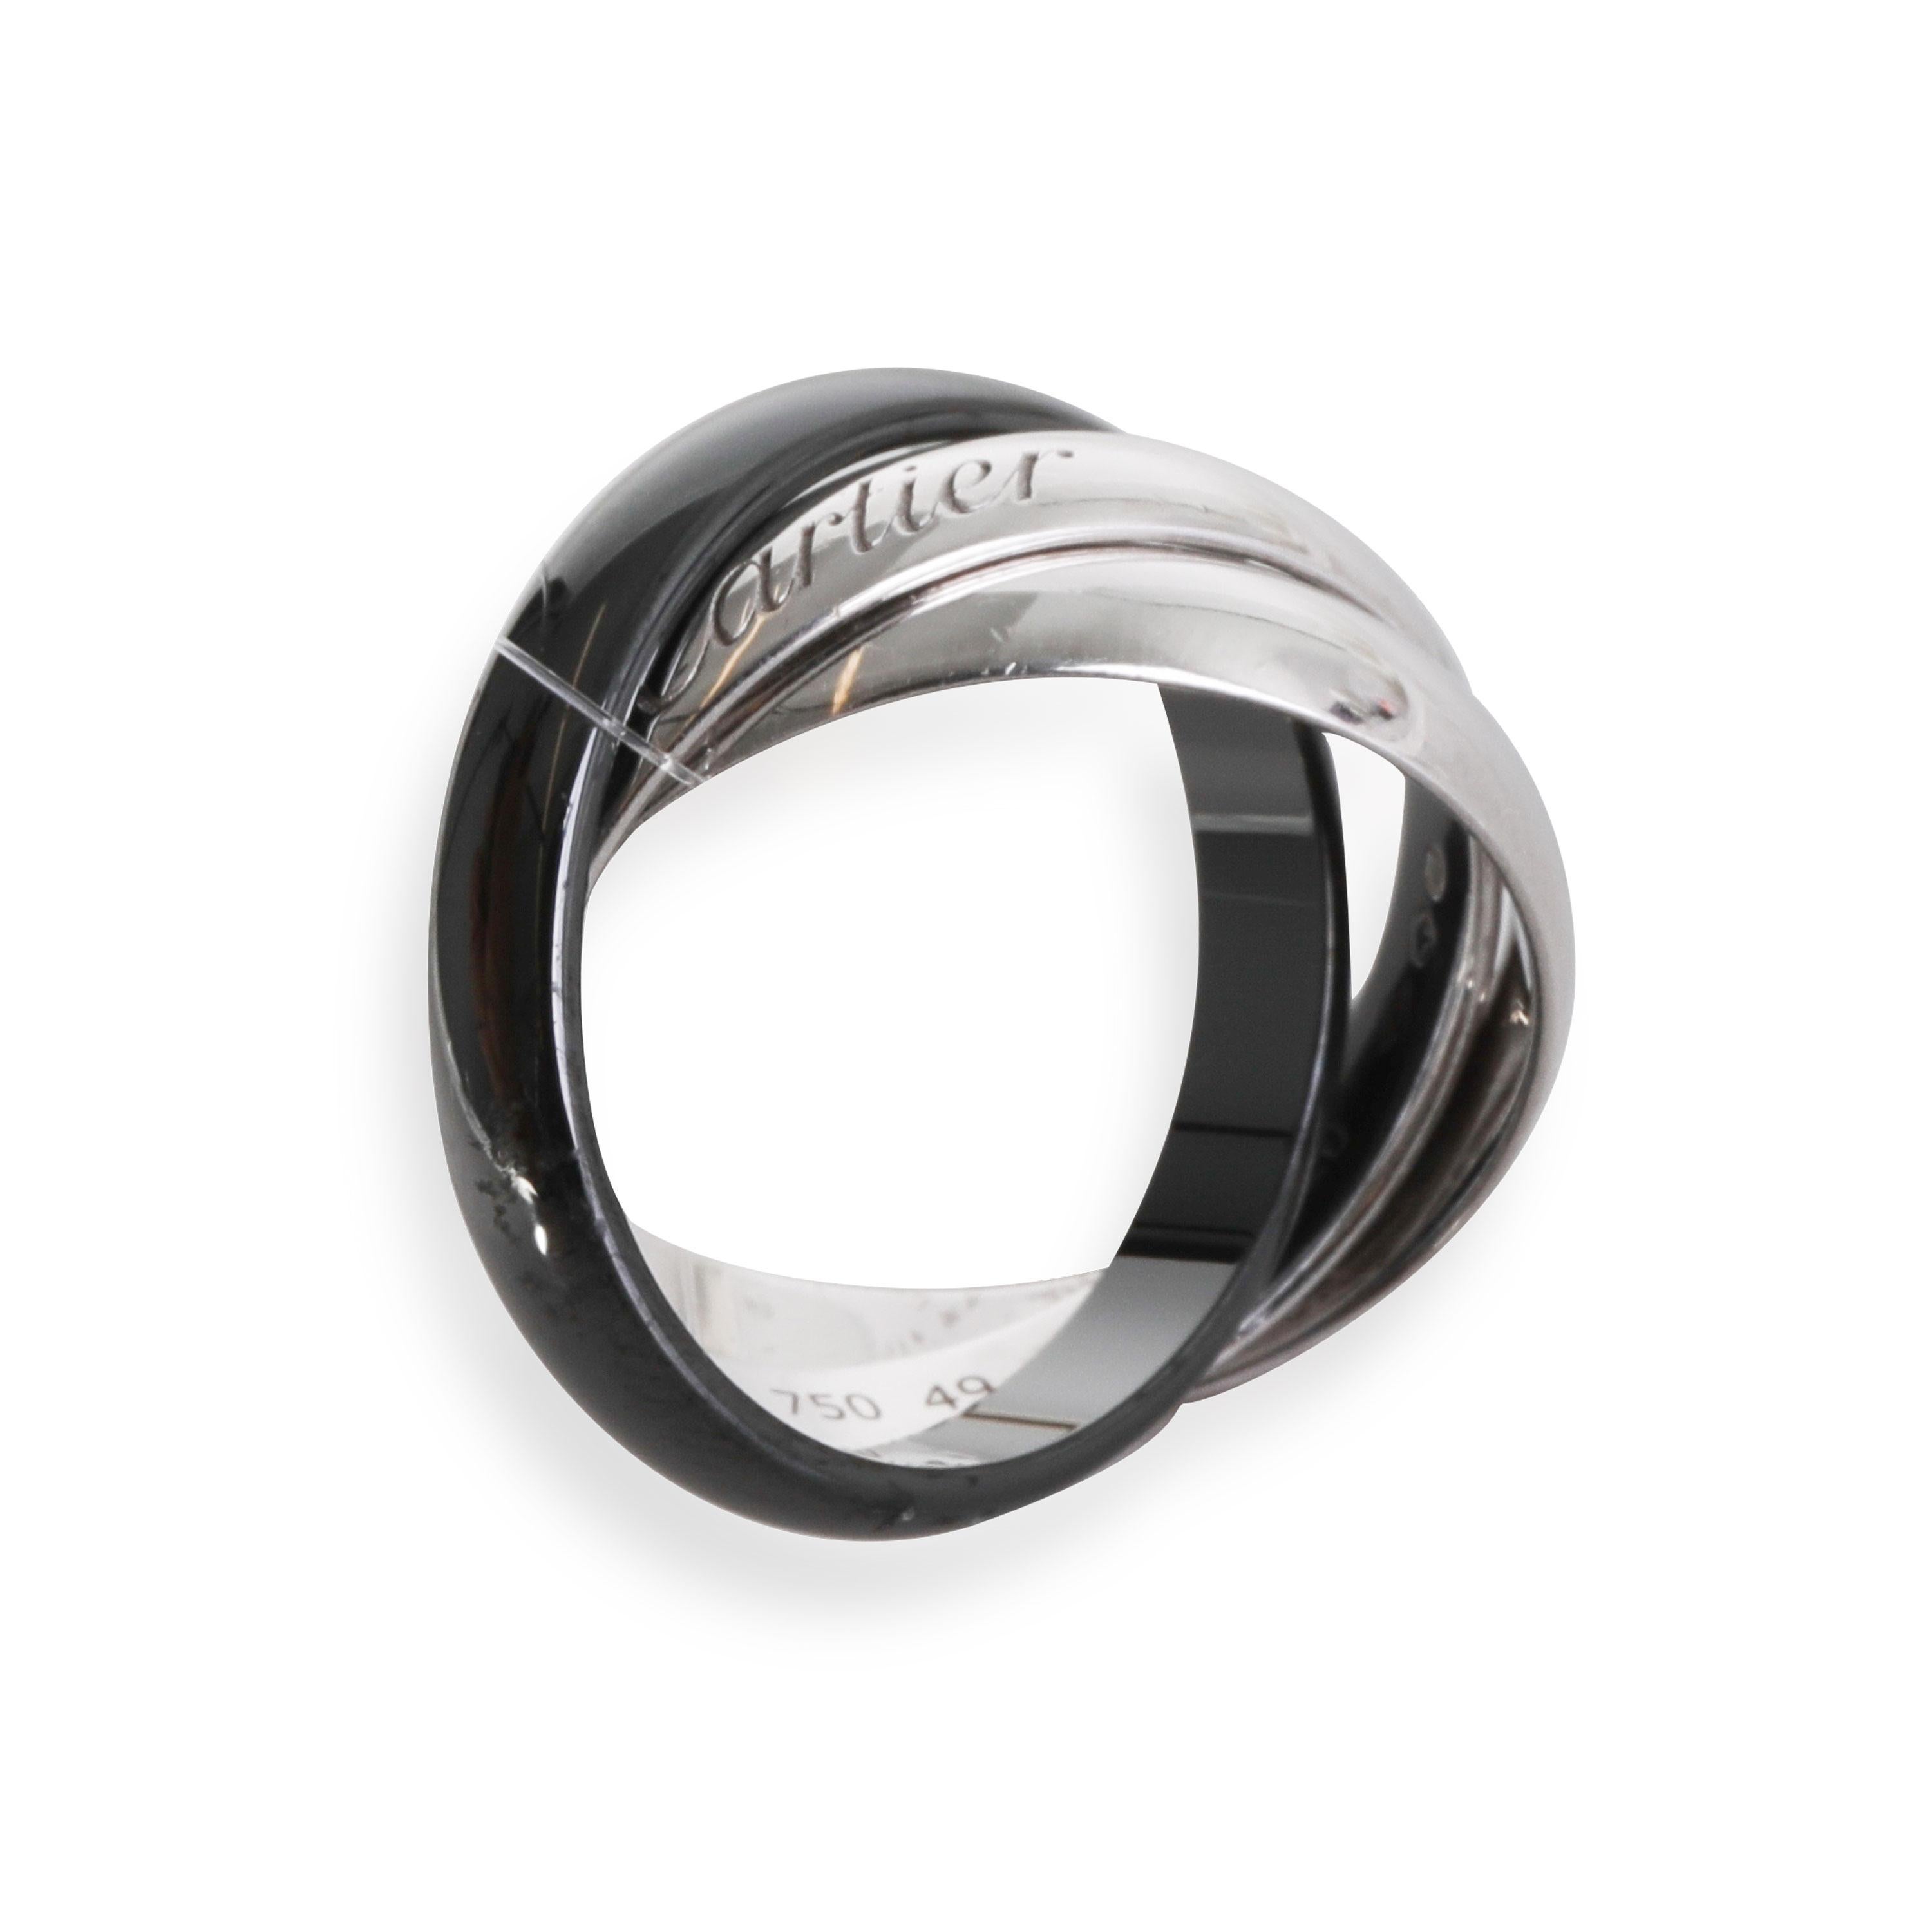 Cartier Trinity Ring in 18k White Gold/Ceramic

PRIMARY DETAILS
SKU: 119103
Listing Title: Cartier Trinity Ring in 18k White Gold/Ceramic
Condition Description: Retails for 1330 USD. In excellent condition and recently polished. Ring size is